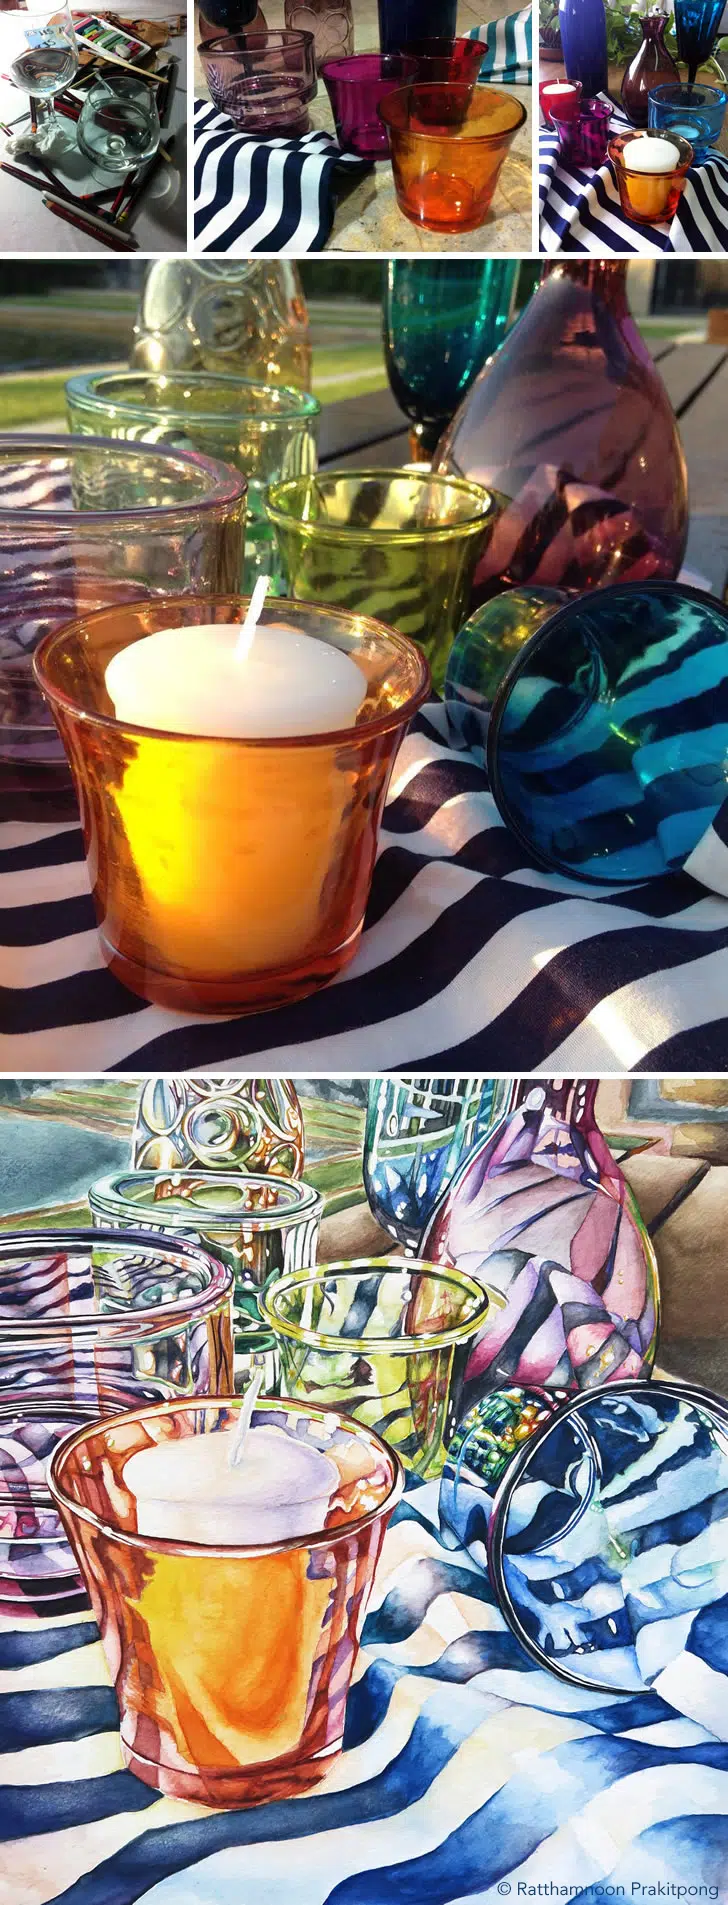 A top image shows a photo of brightly colored candle holders with candles in them. The bottom photo is a painting of it.